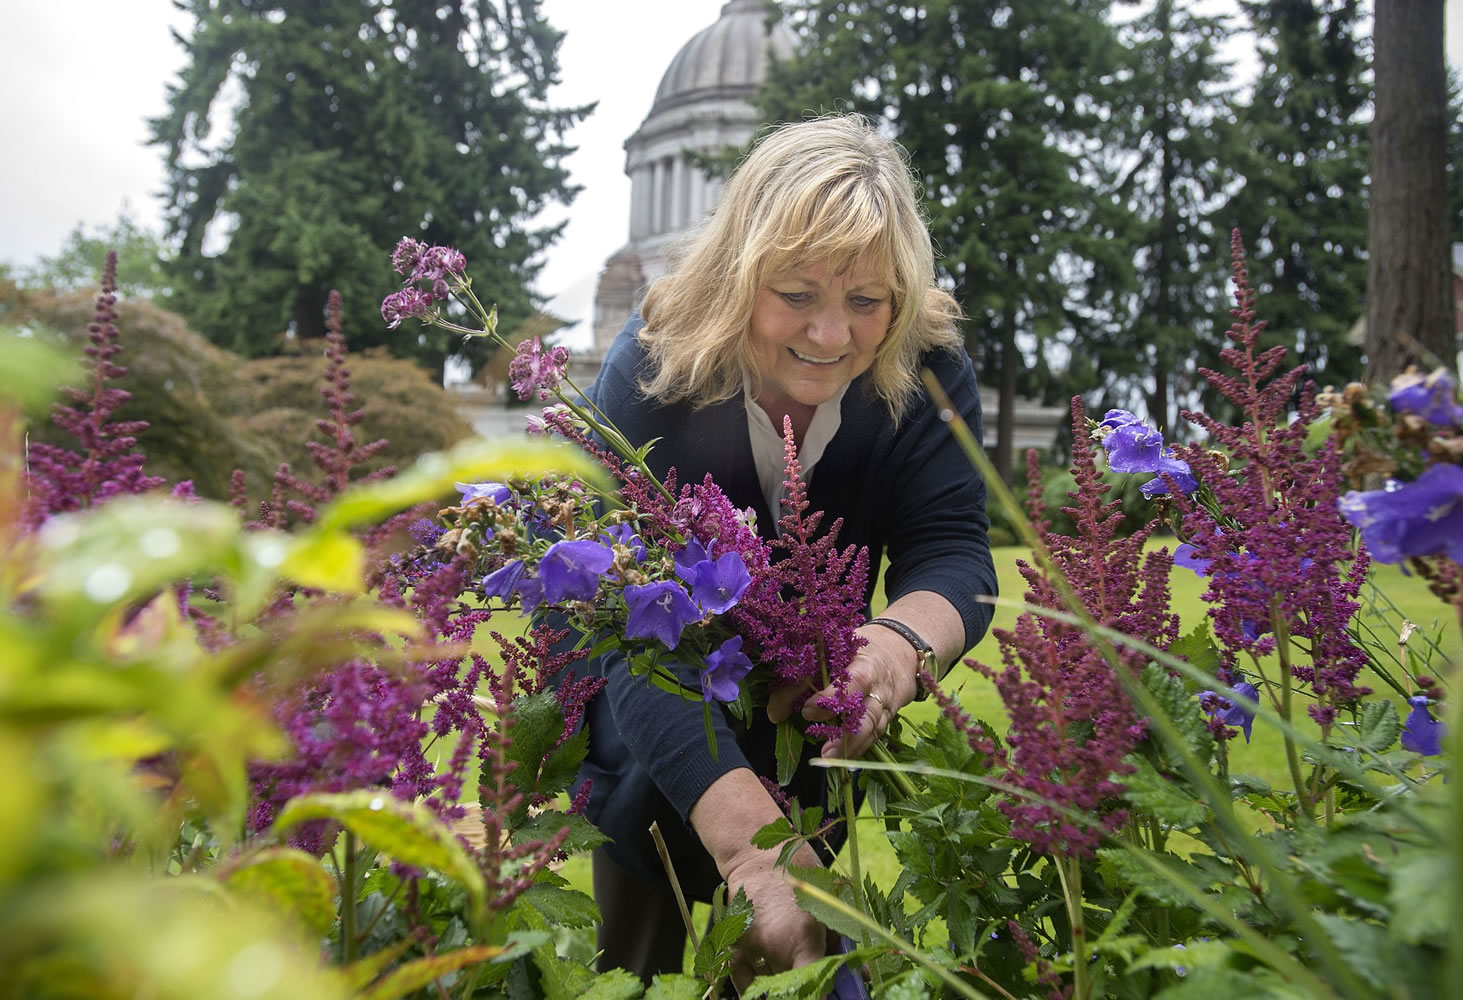 Washington's first lady, Trudi Inslee, works on her flower garden June 27 at the governor's mansion in Olympia.